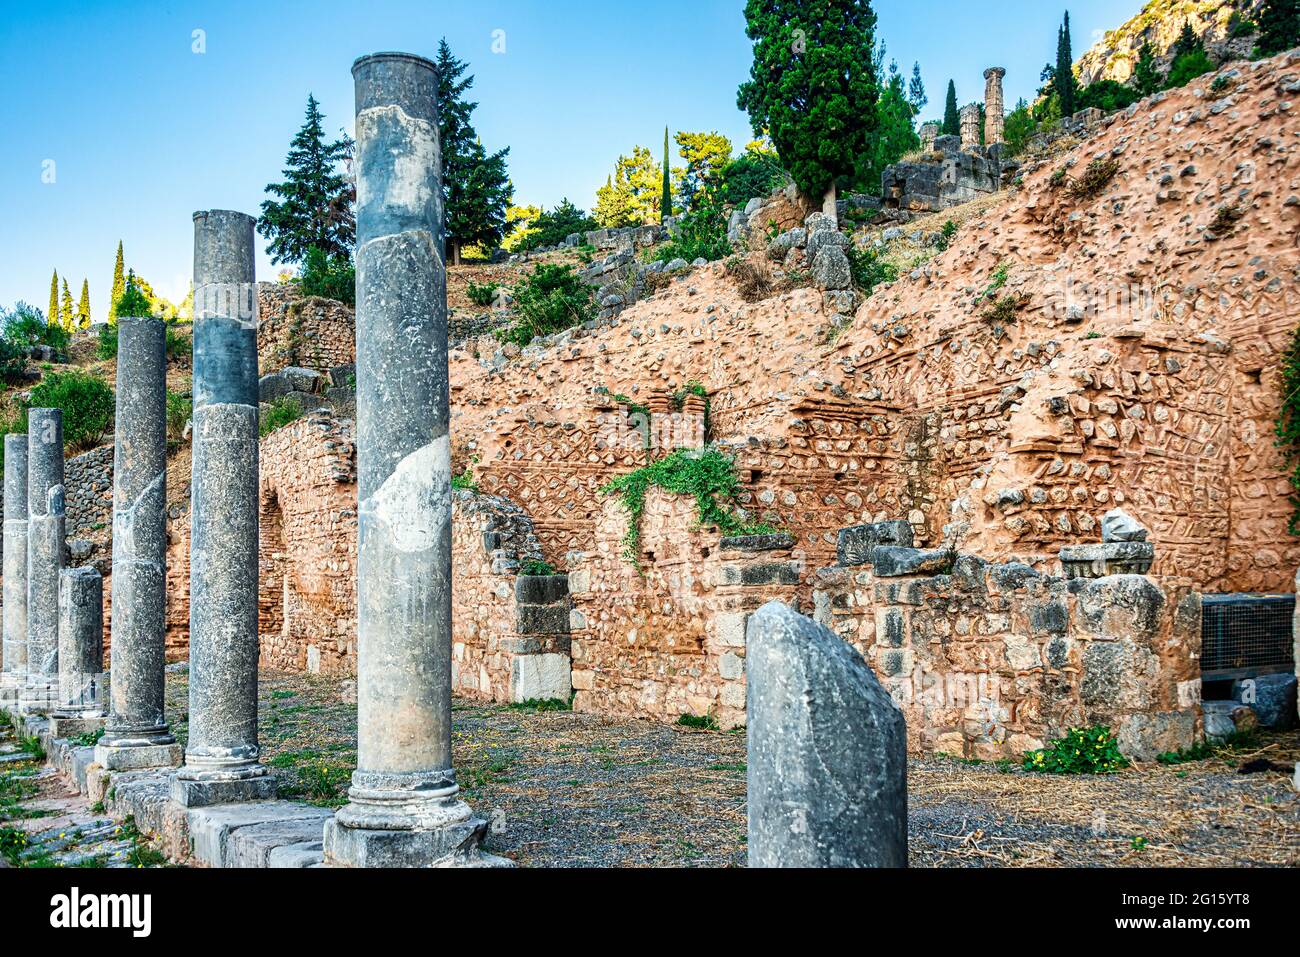 View of the main monuments and sites of Greece. Ruins of Delphi. Oracle of Delphi Stock Photo